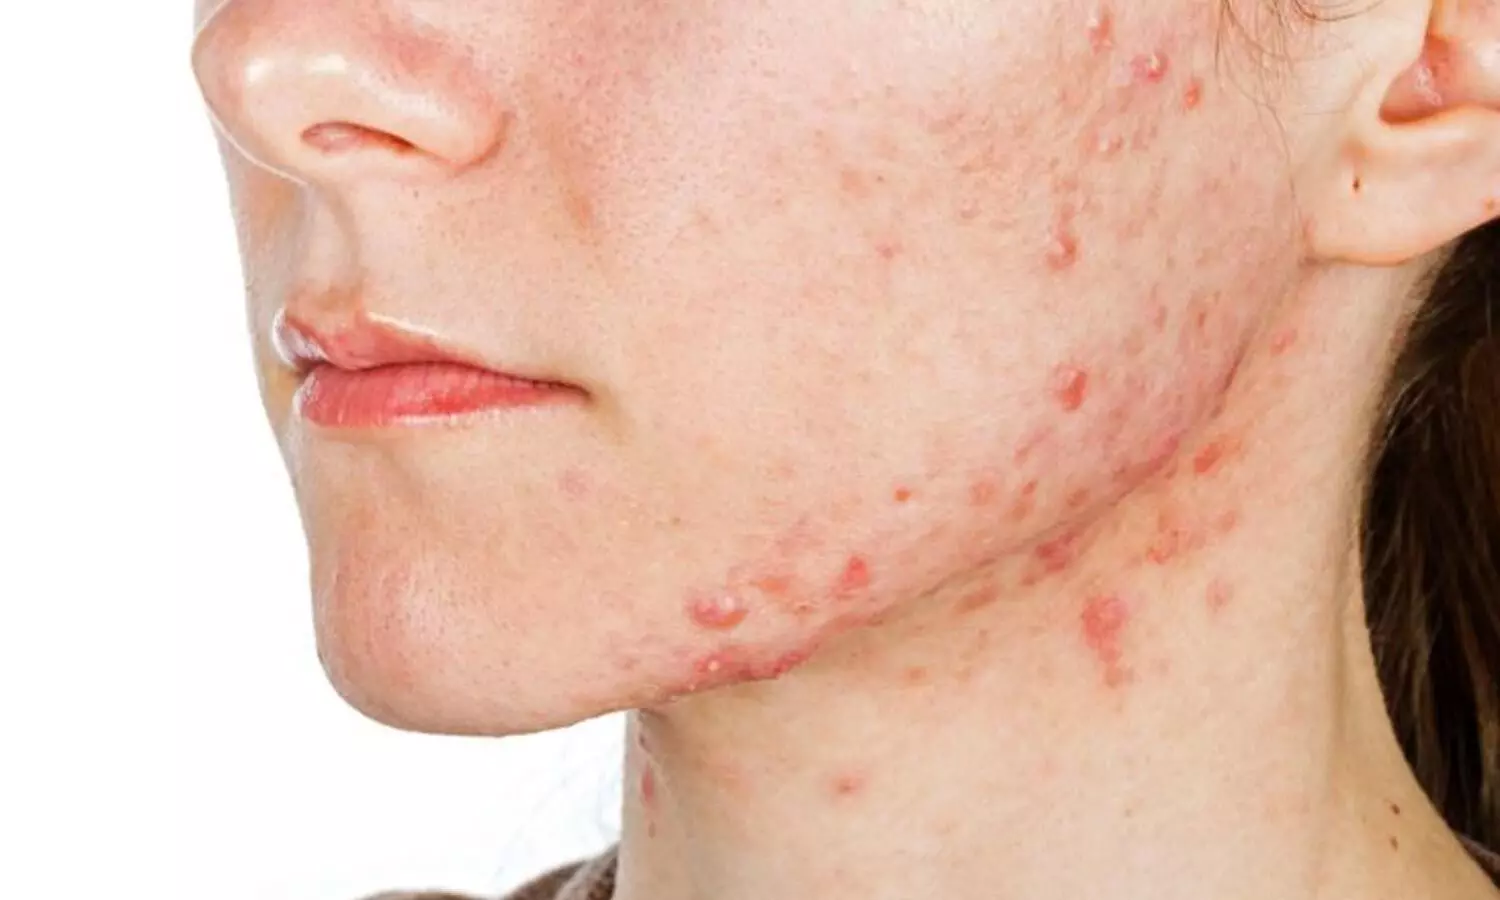 Potassium being monitored in acne patients on spironolactone, defying guidelines: JAMA